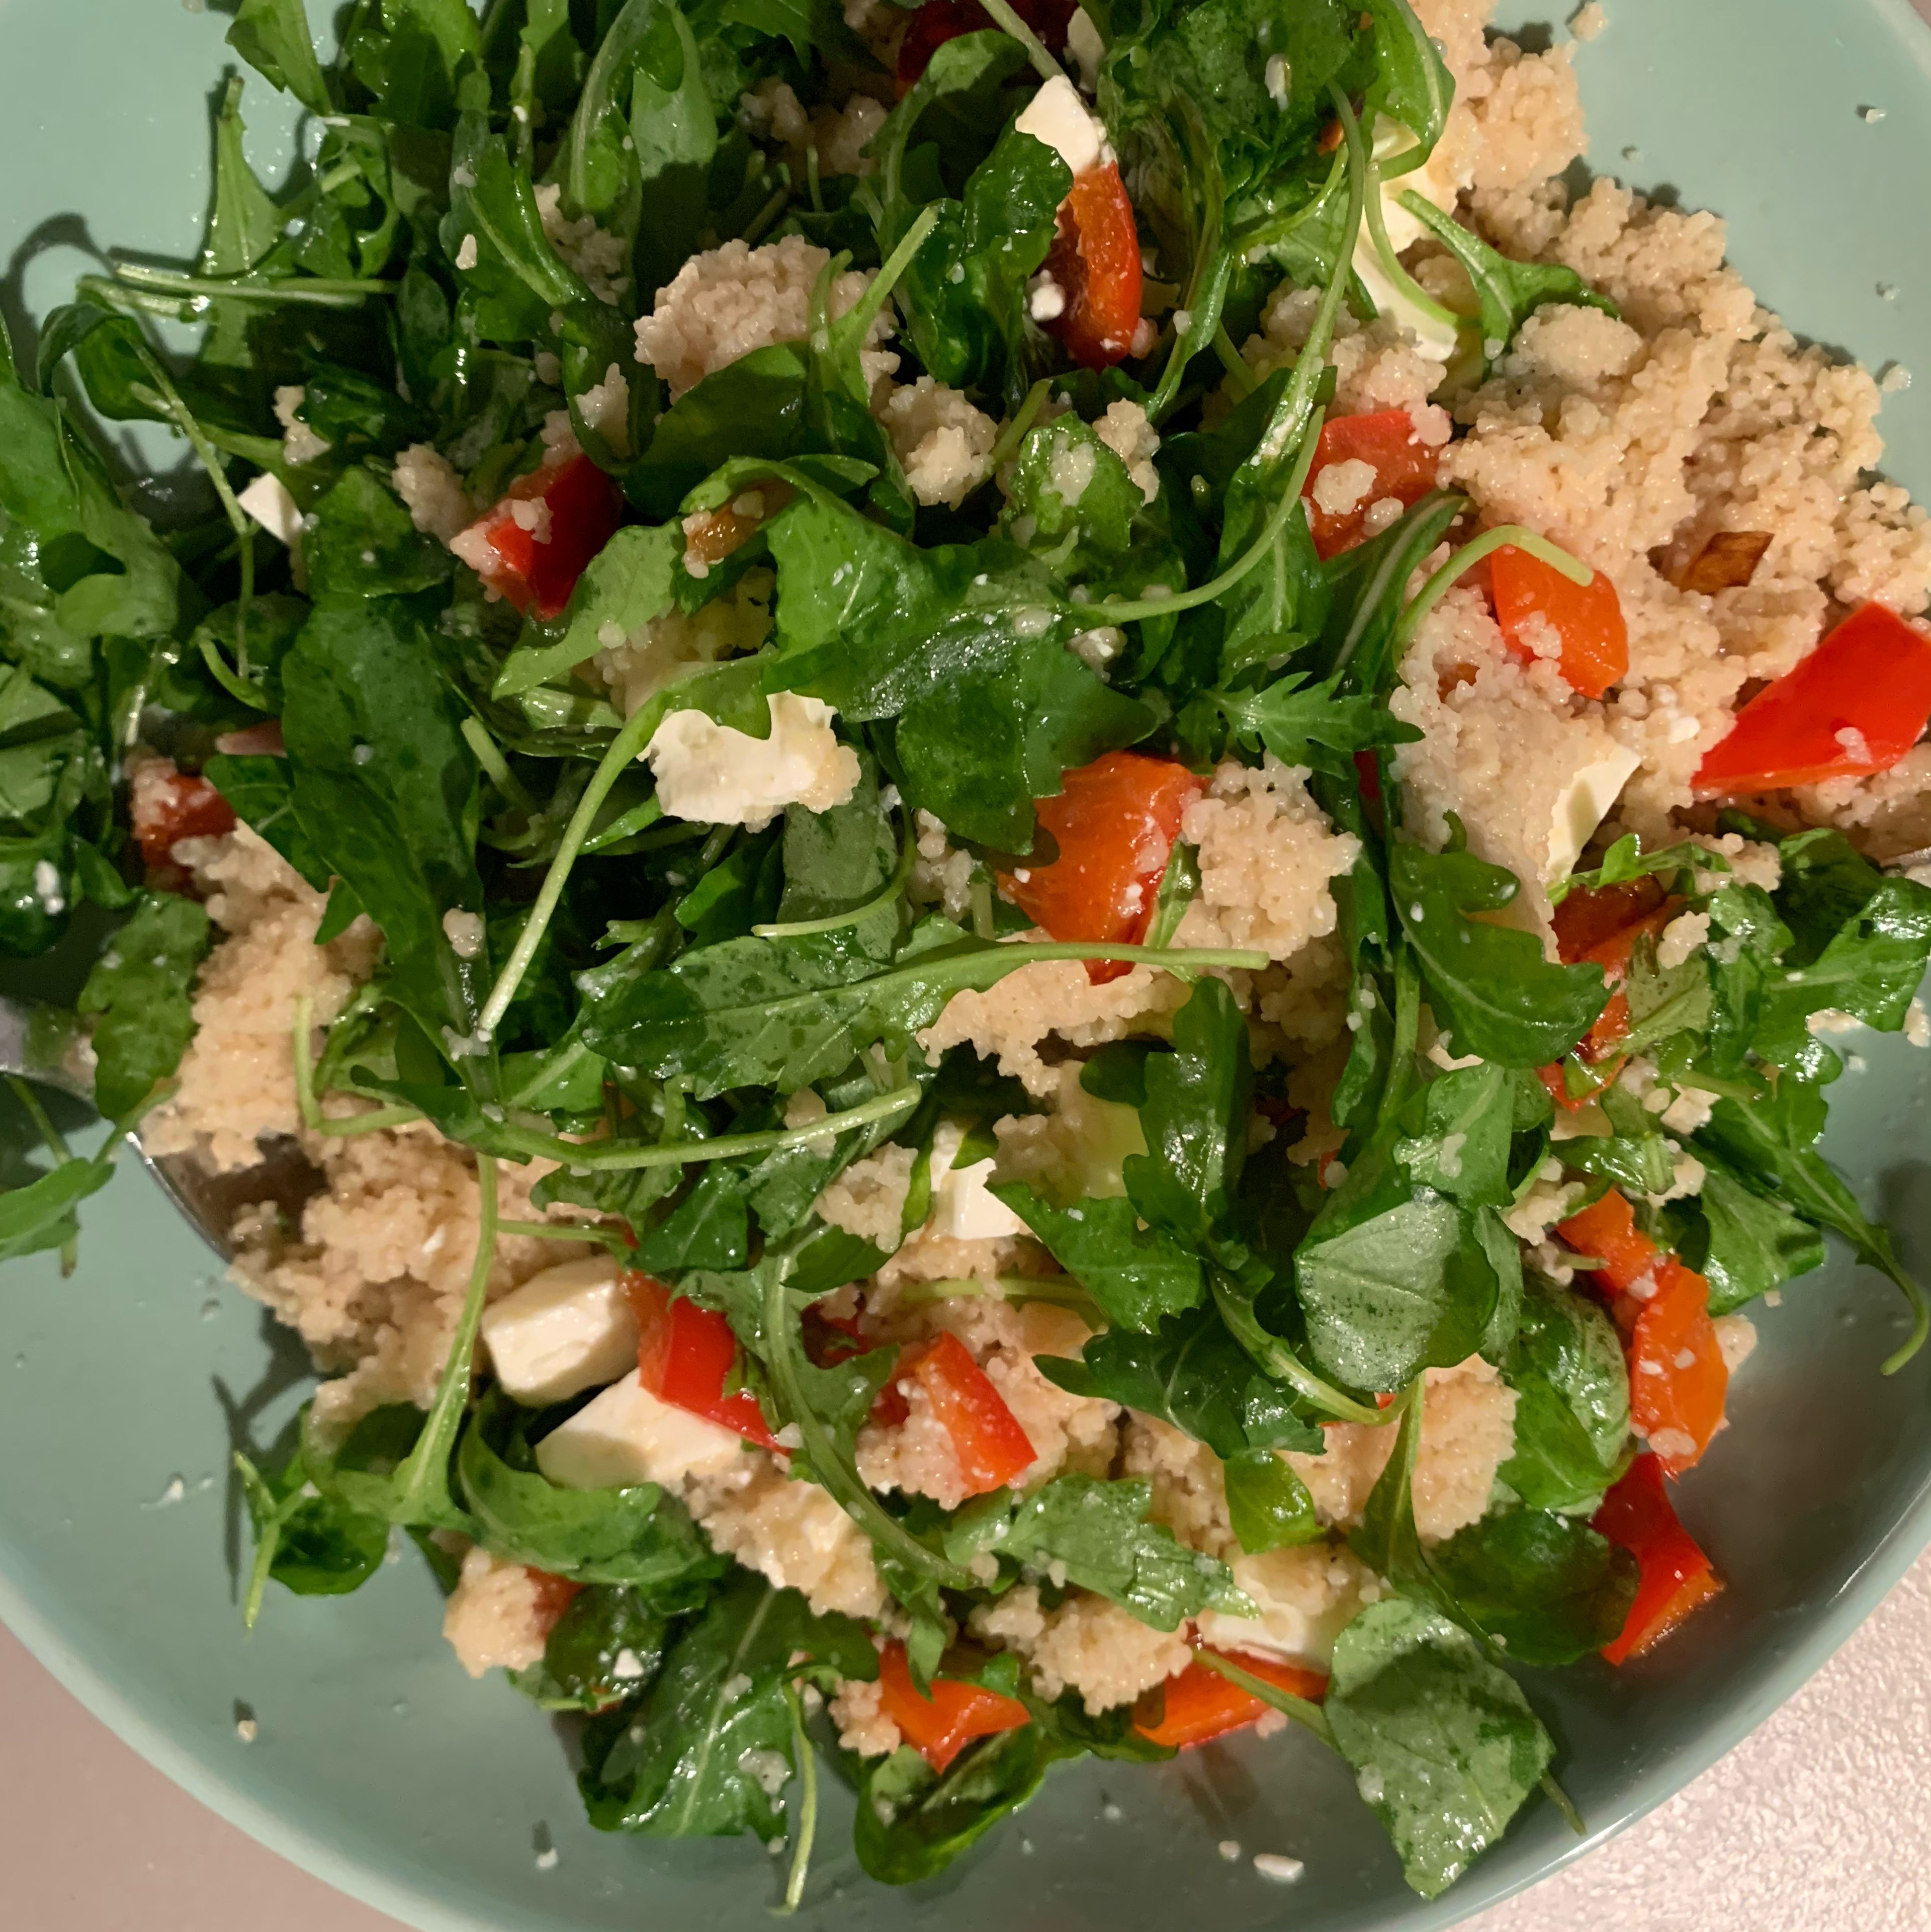 Mix the couscous, arugula, feta cheese, pepper, chopped parsley, olive oil and salt in a bowl.